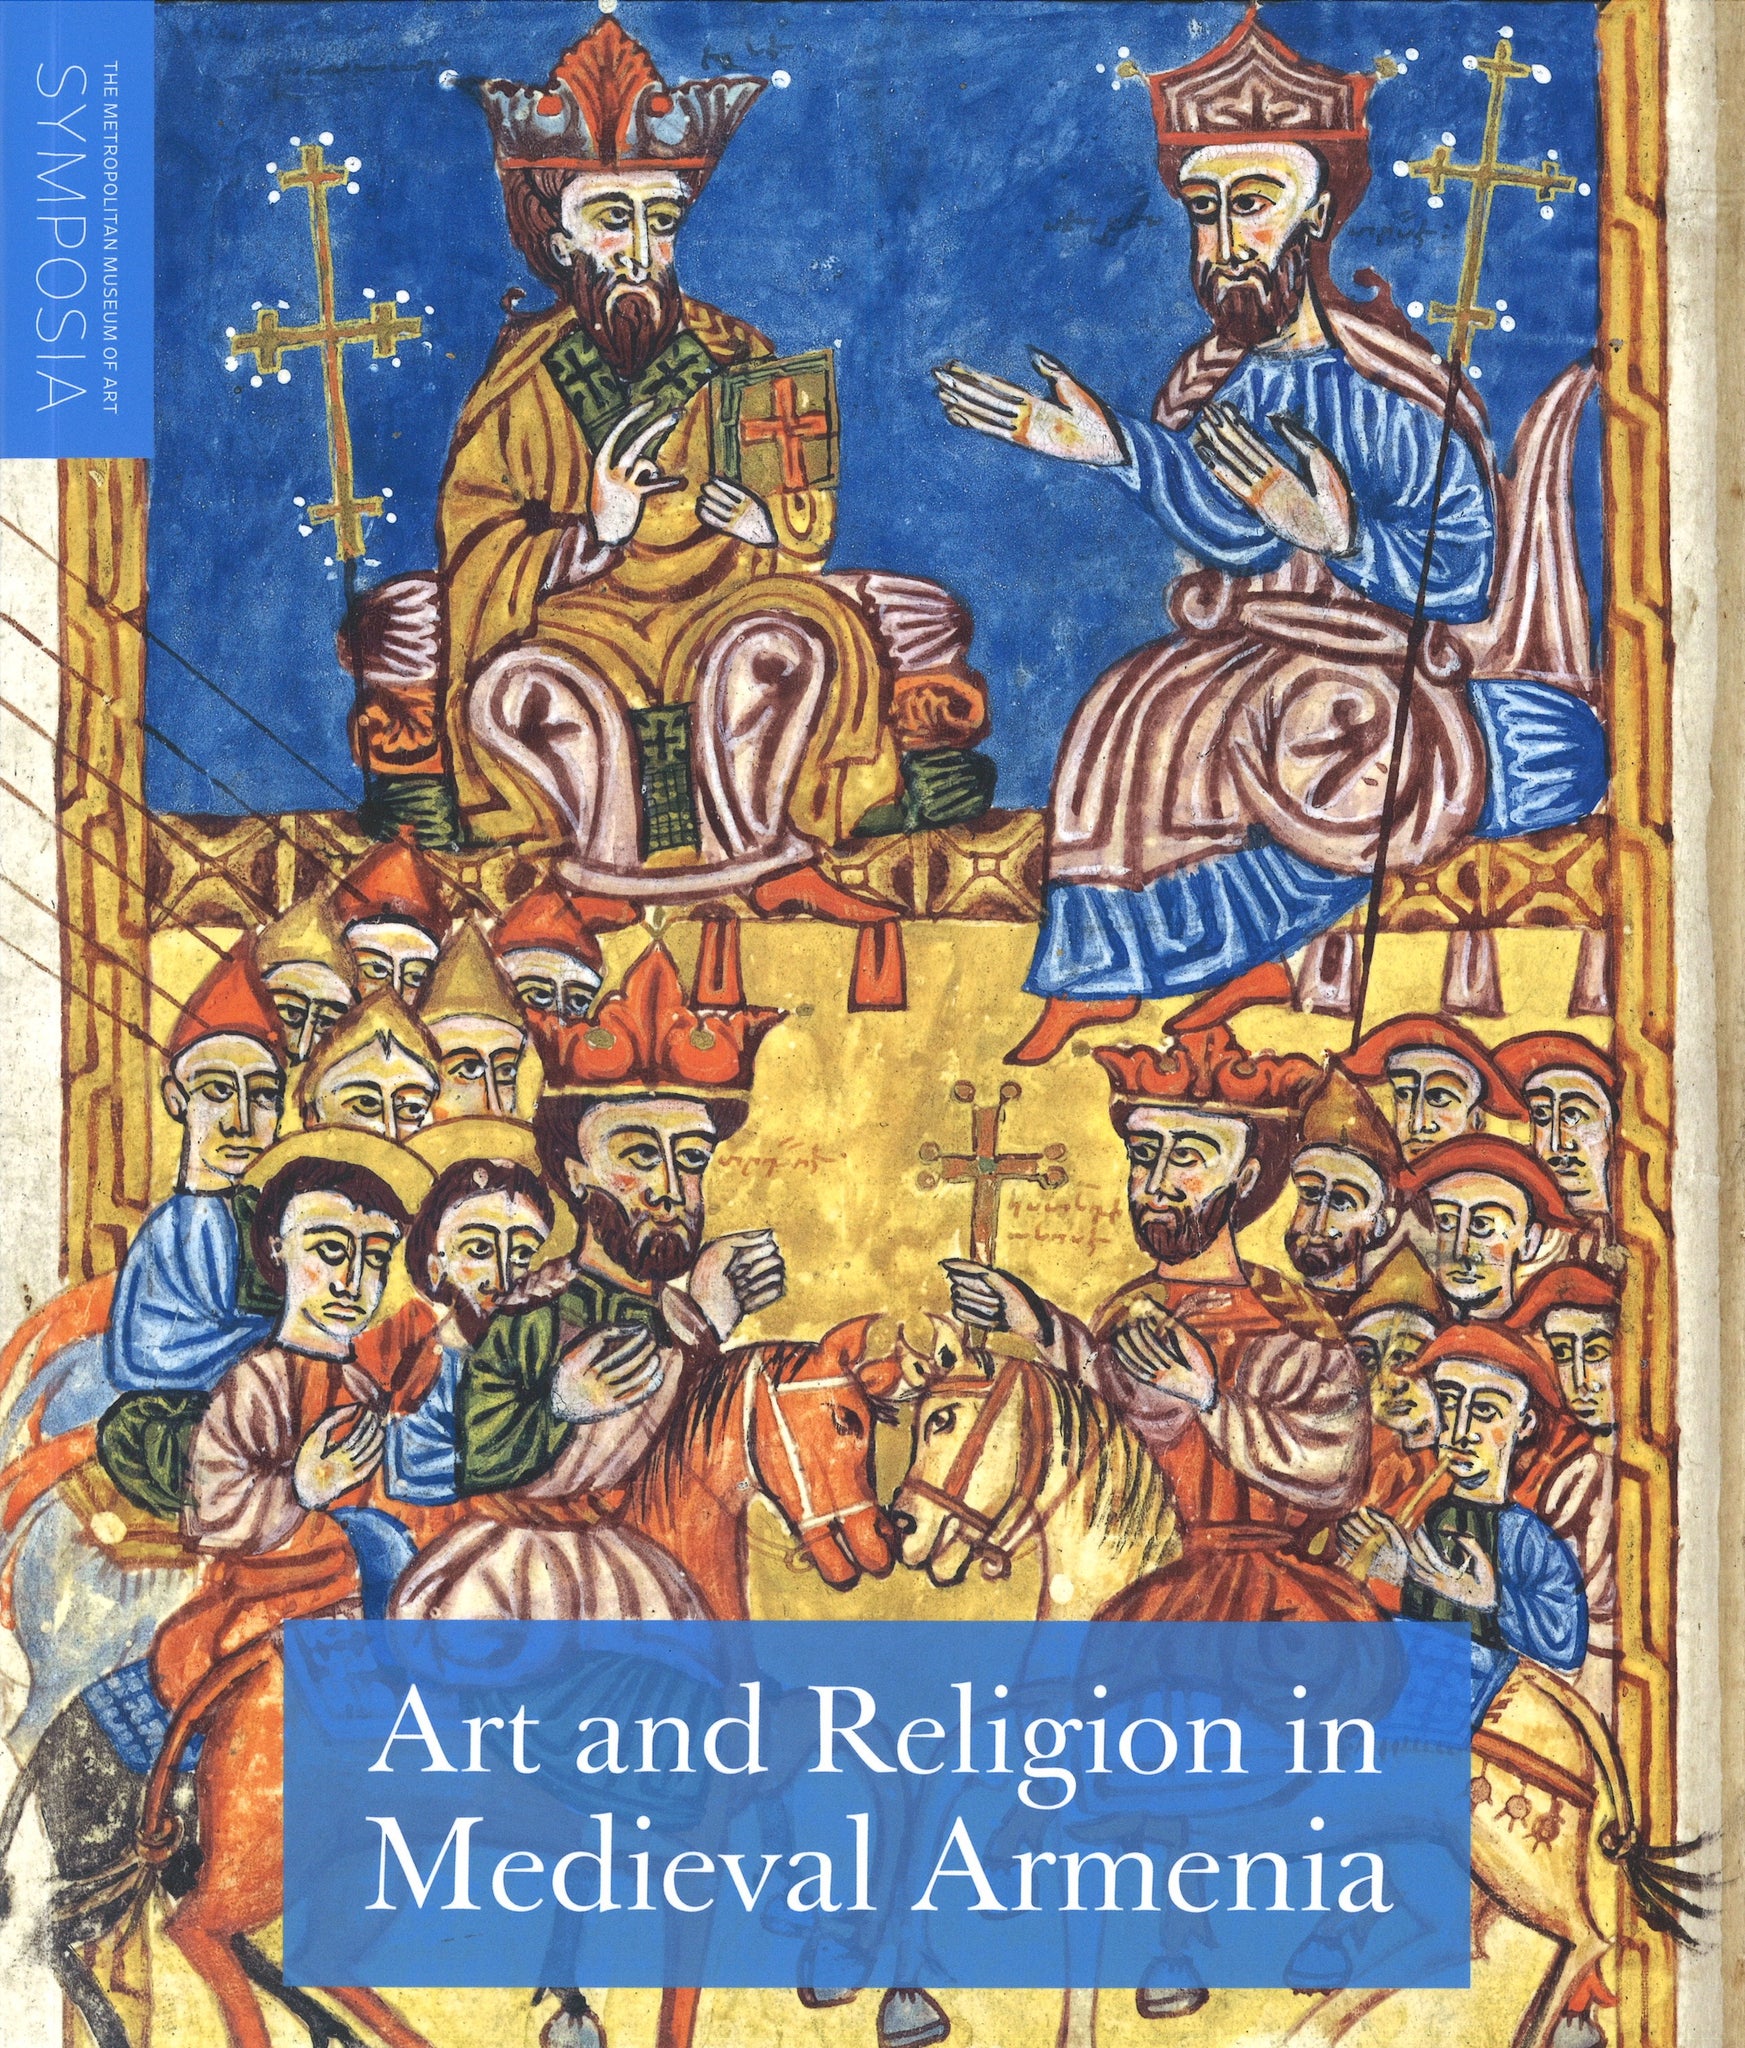 ART AND RELIGION IN MEDIEVAL ARMENIA